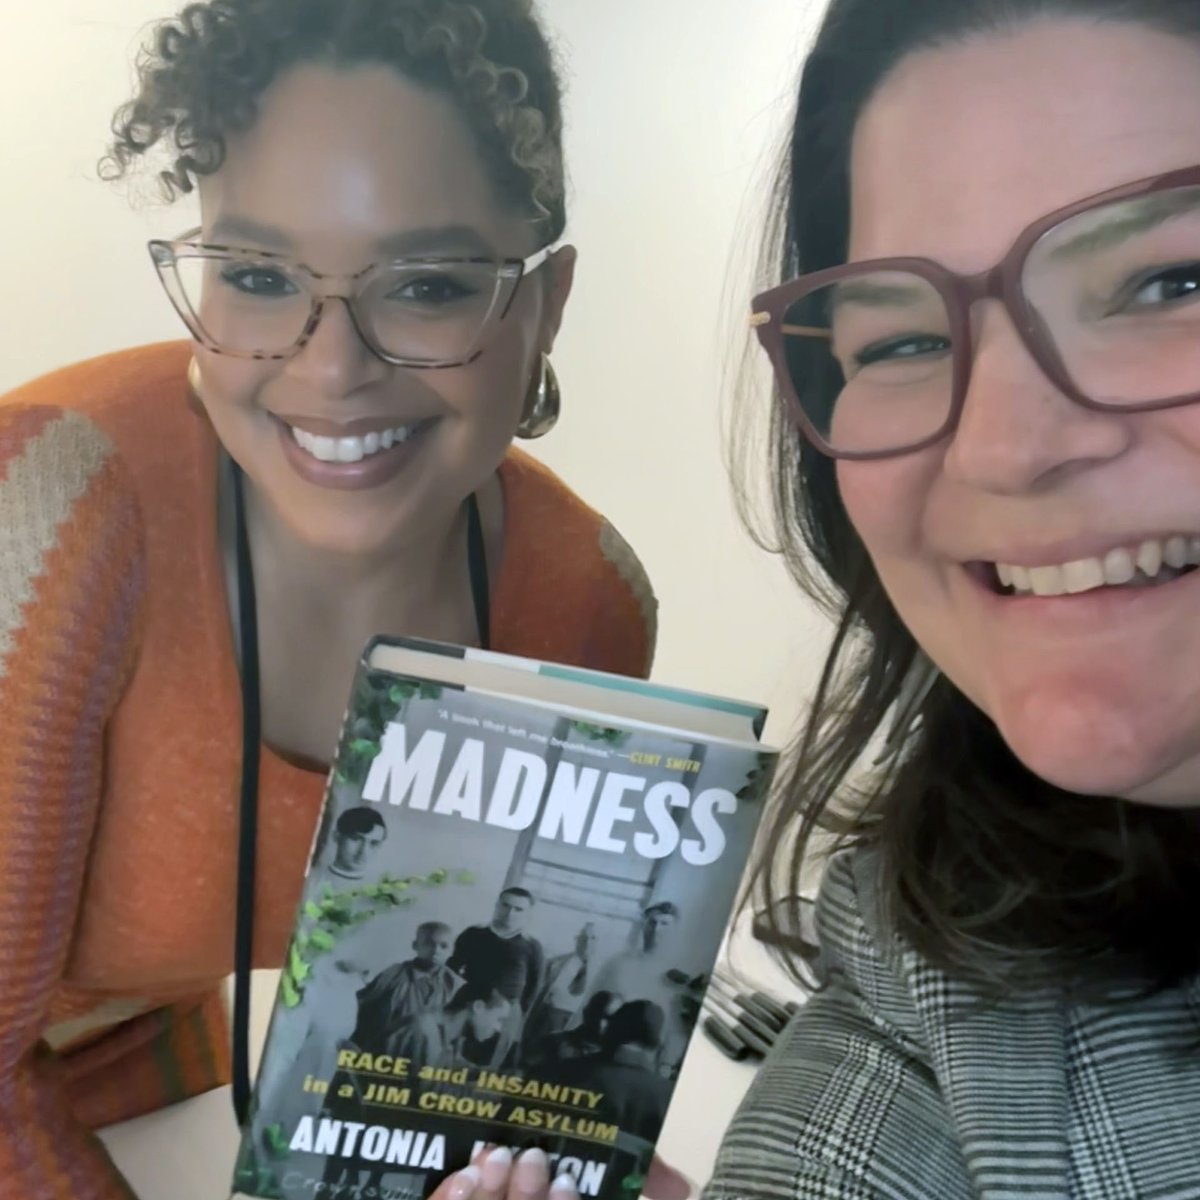 As #MentalHealthAwarenessMonth comes to a close, we asked Michelle to reflect on her experience at the summit, which was convened in Philadelphia.  'I had the pleasure of meeting Antonia Hylton @ahylton26, author of #Madness: Race and Insanity in a Jim Crow Asylum.' 2/